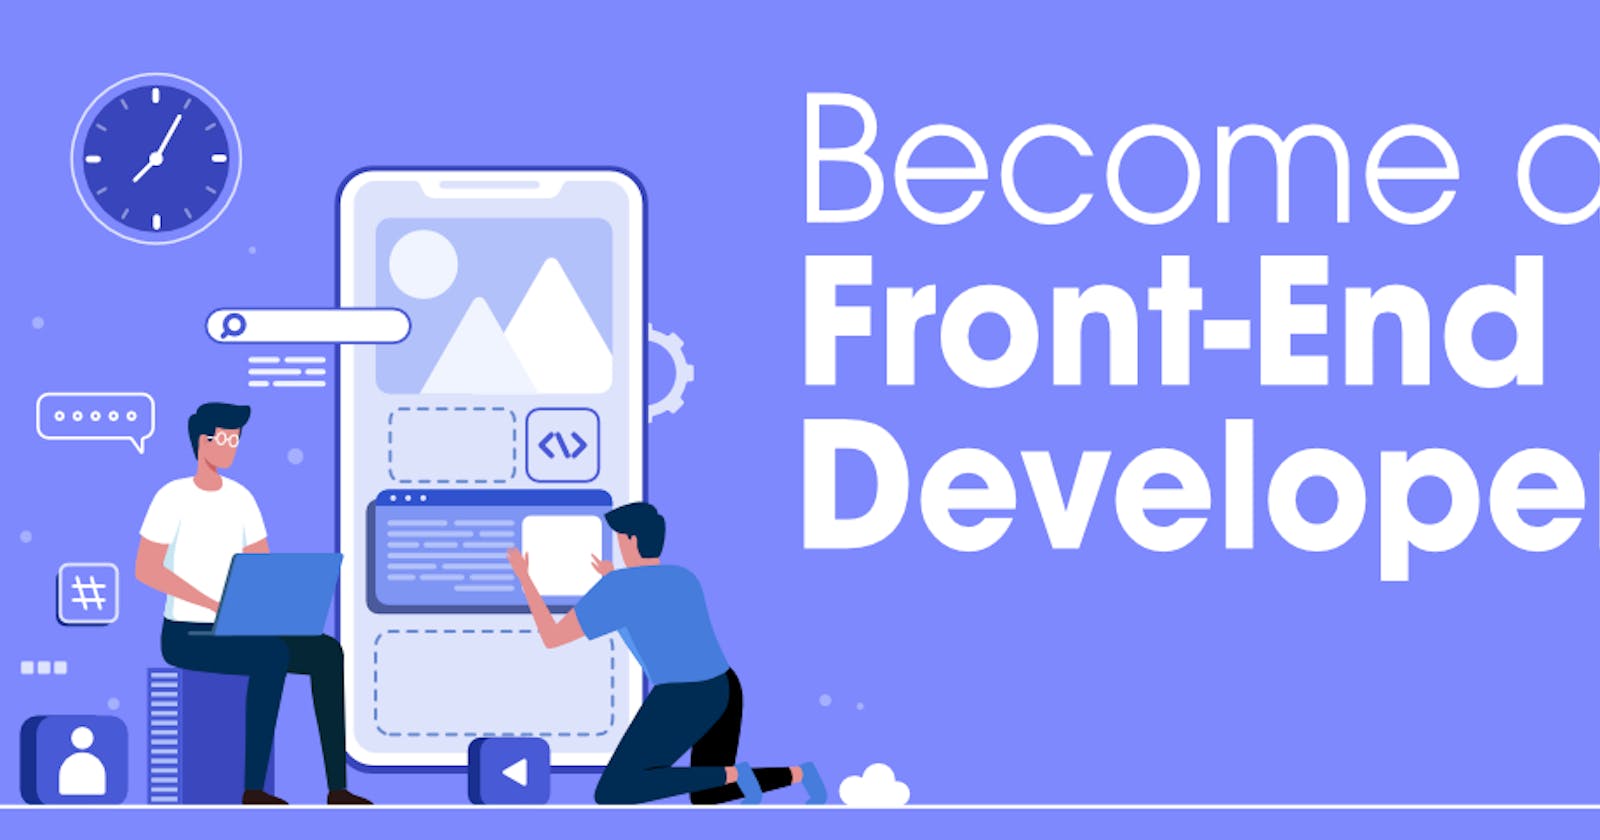 Become a Front End Developer.